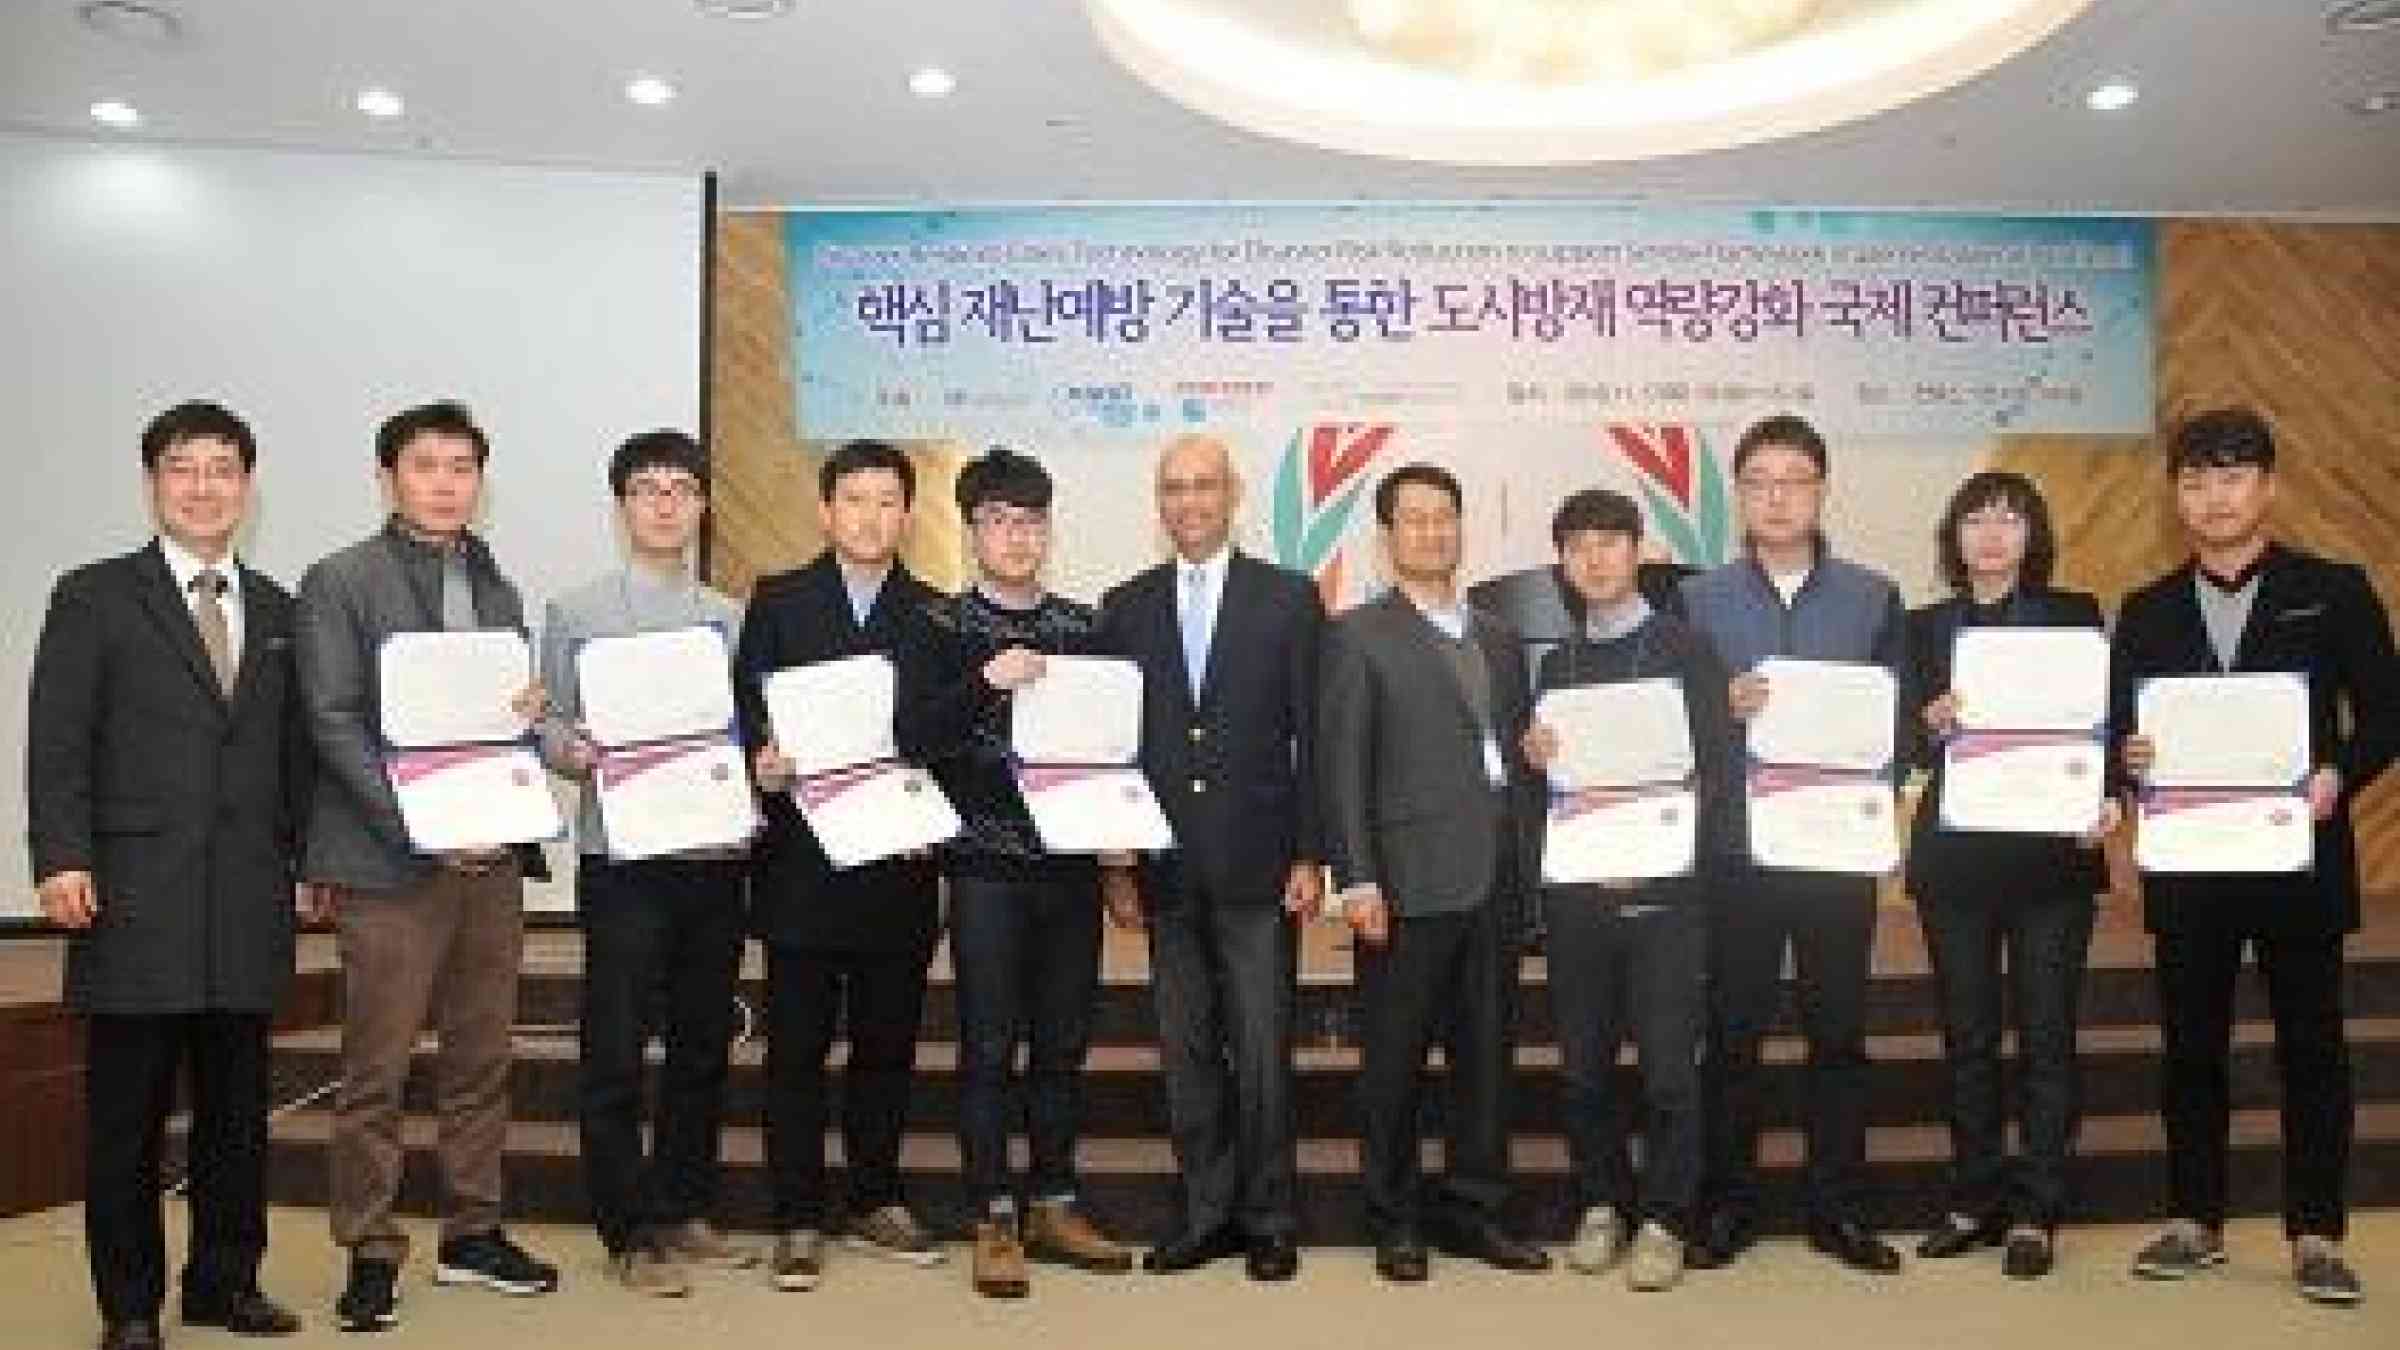 Eight of the South Korean cities that have signed up to UNISDR'S Making Cities Resilient campaign this year received their certificates during the event in Ilsan (Photo: UNISDR)